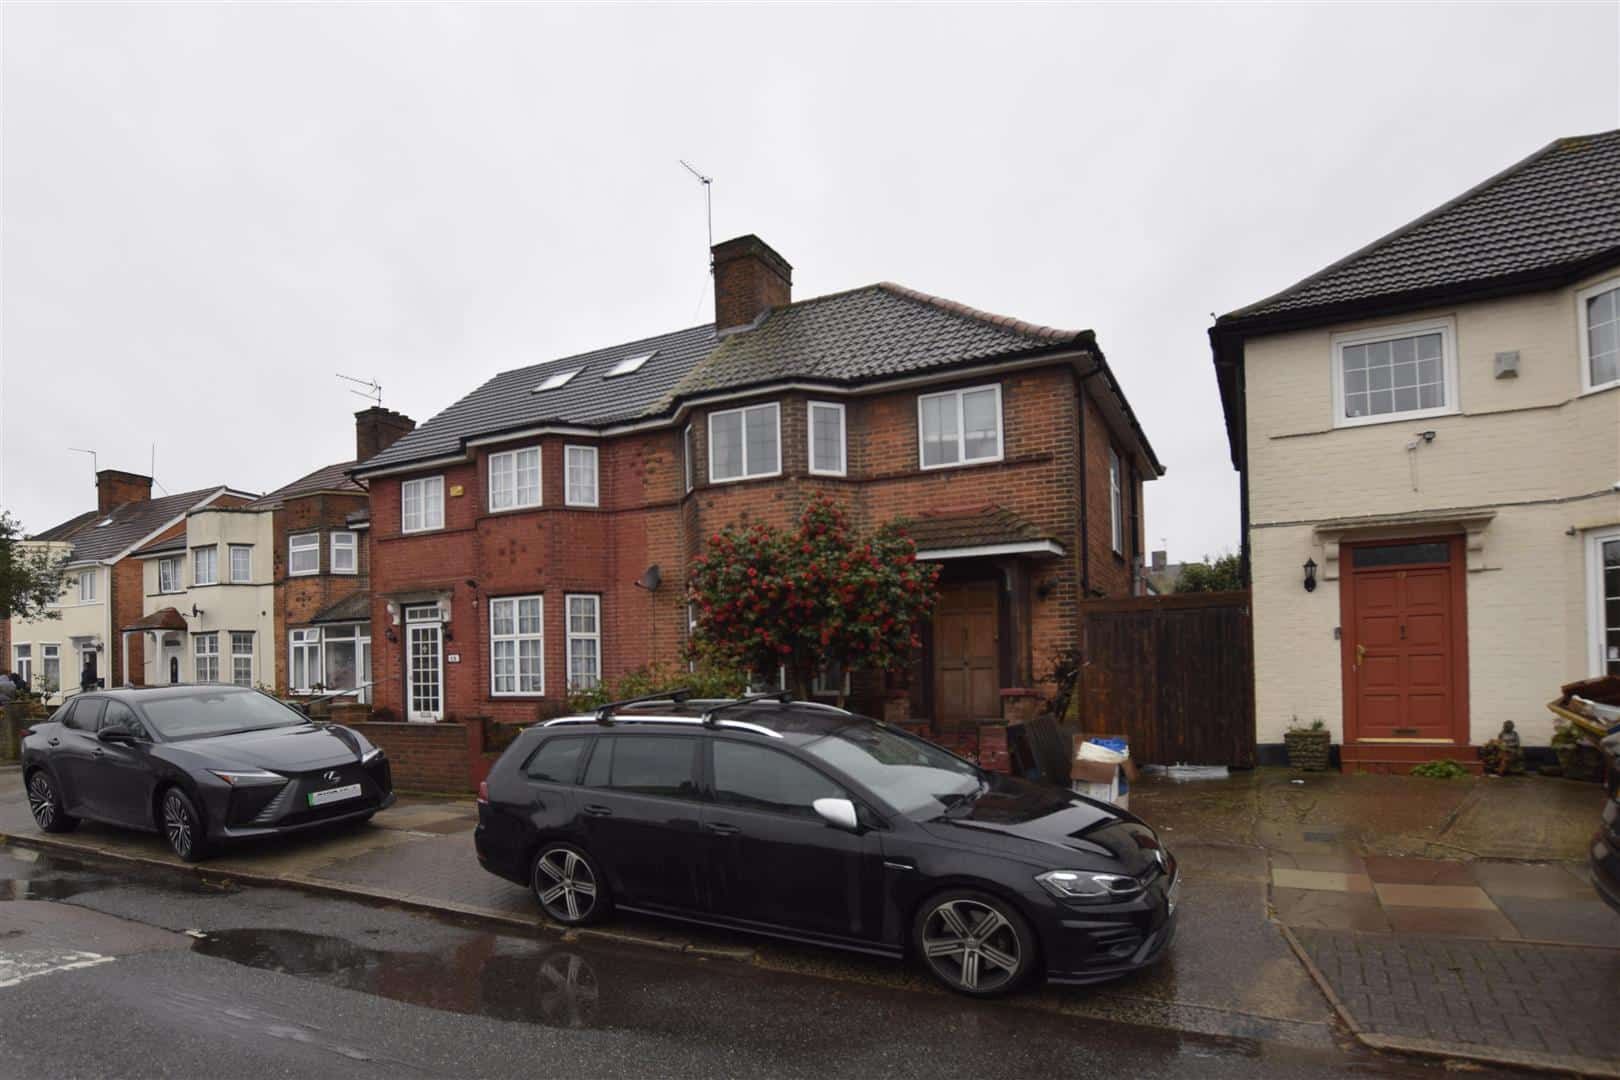 Chalfont Avenue, Wembley, Middlesex, HA9 6NW